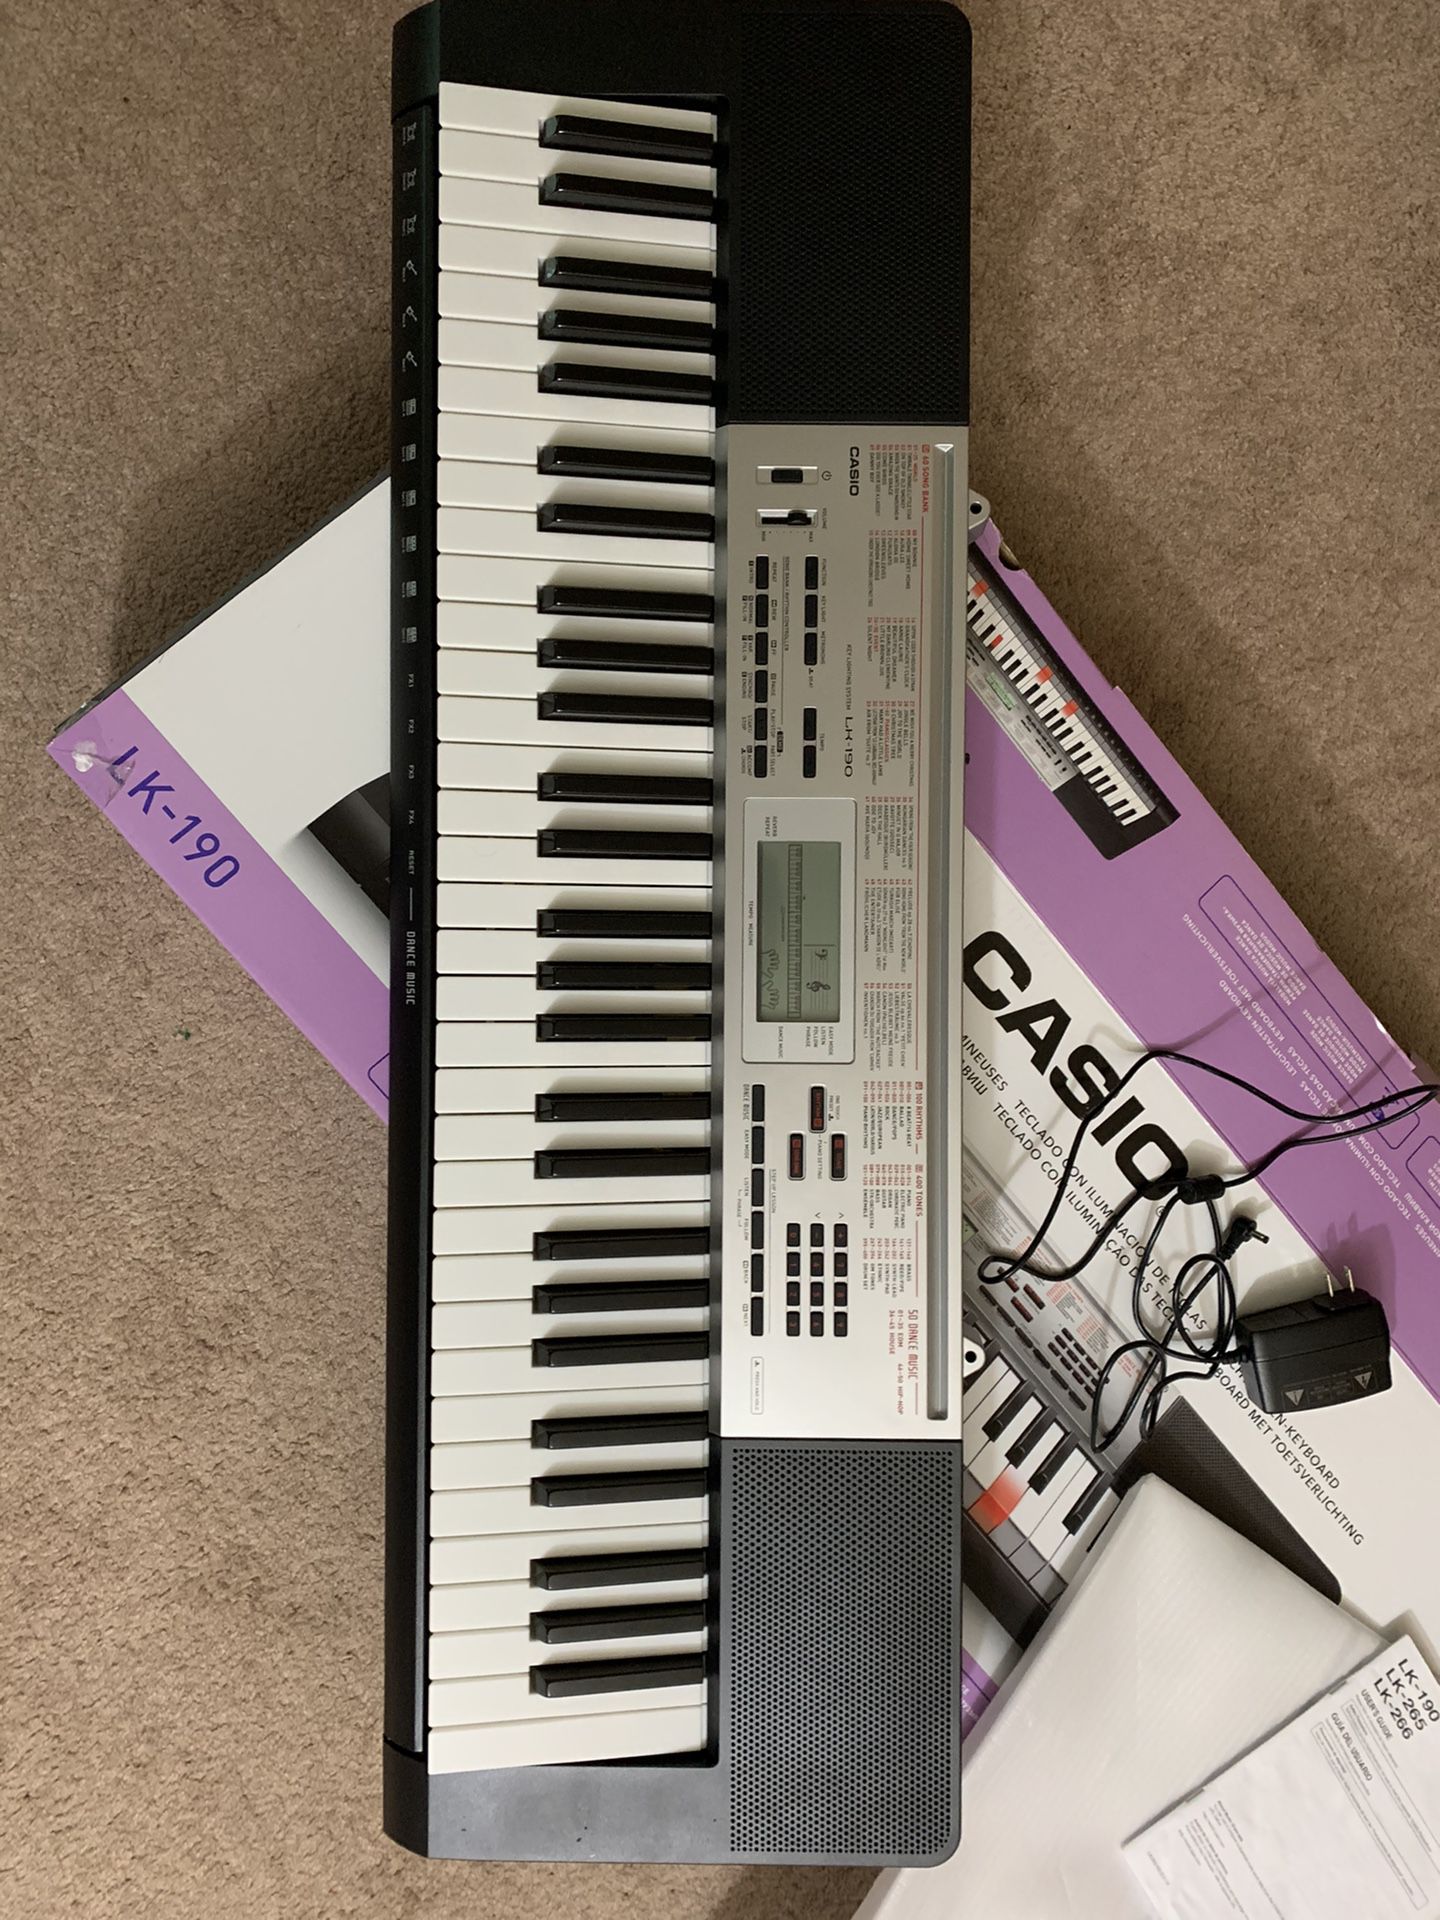 casio piano LK-190 61-Key Lighted Portable Keyboard with Dance Music Mode price negotiable